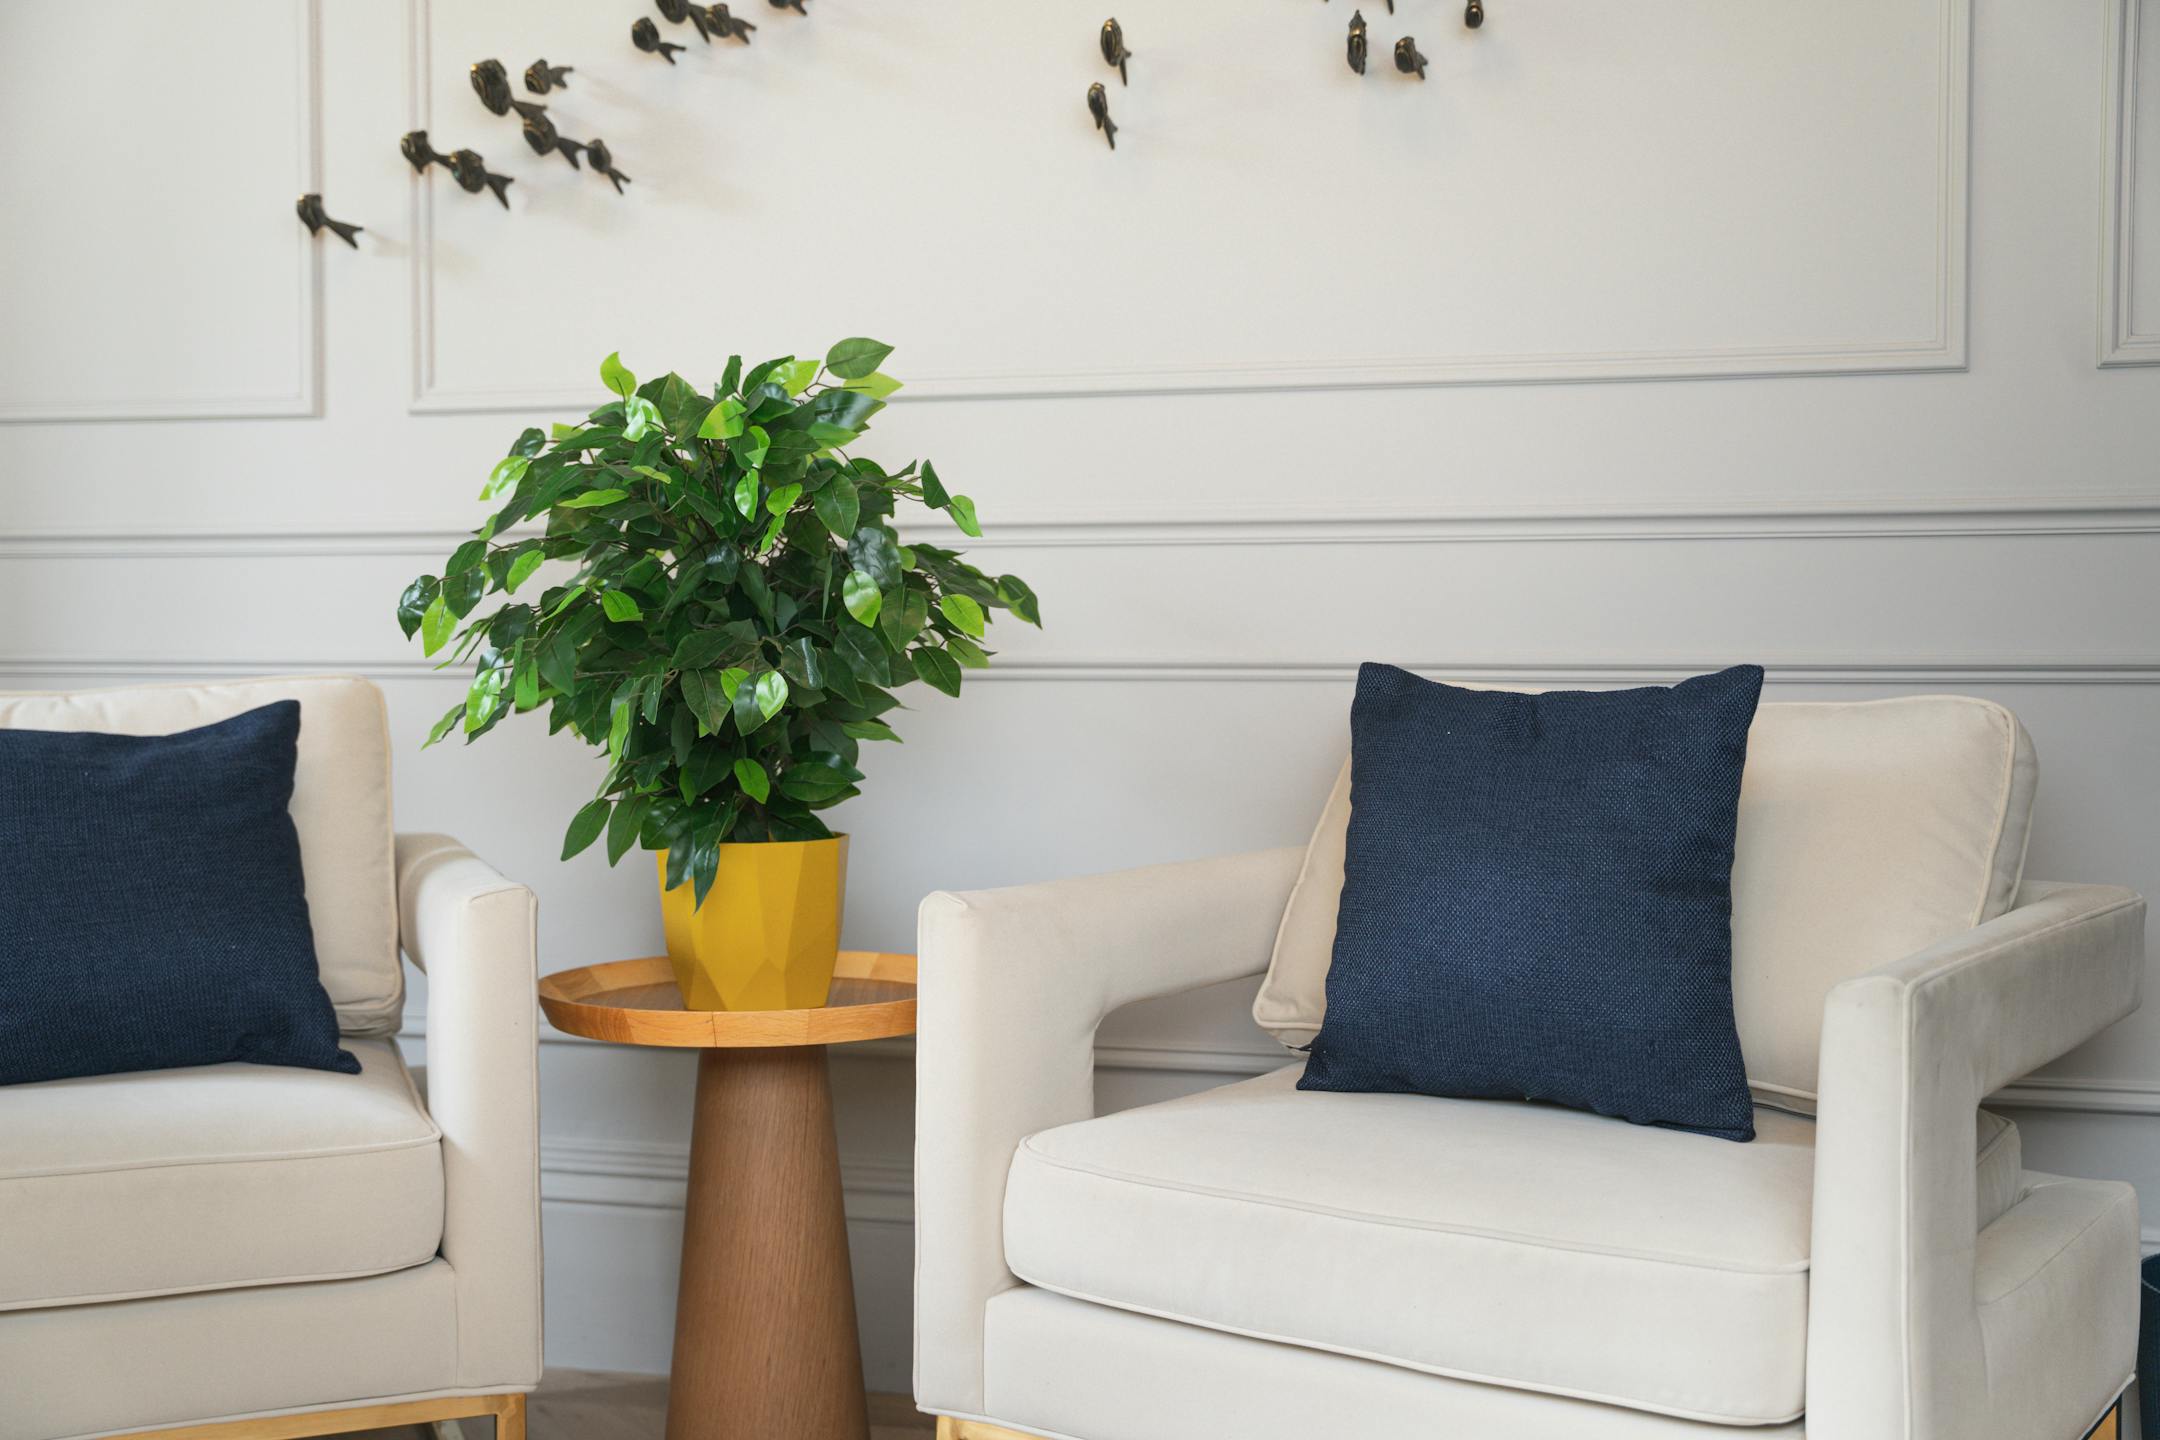 Artificial ficus bush in yellow pot on living room table